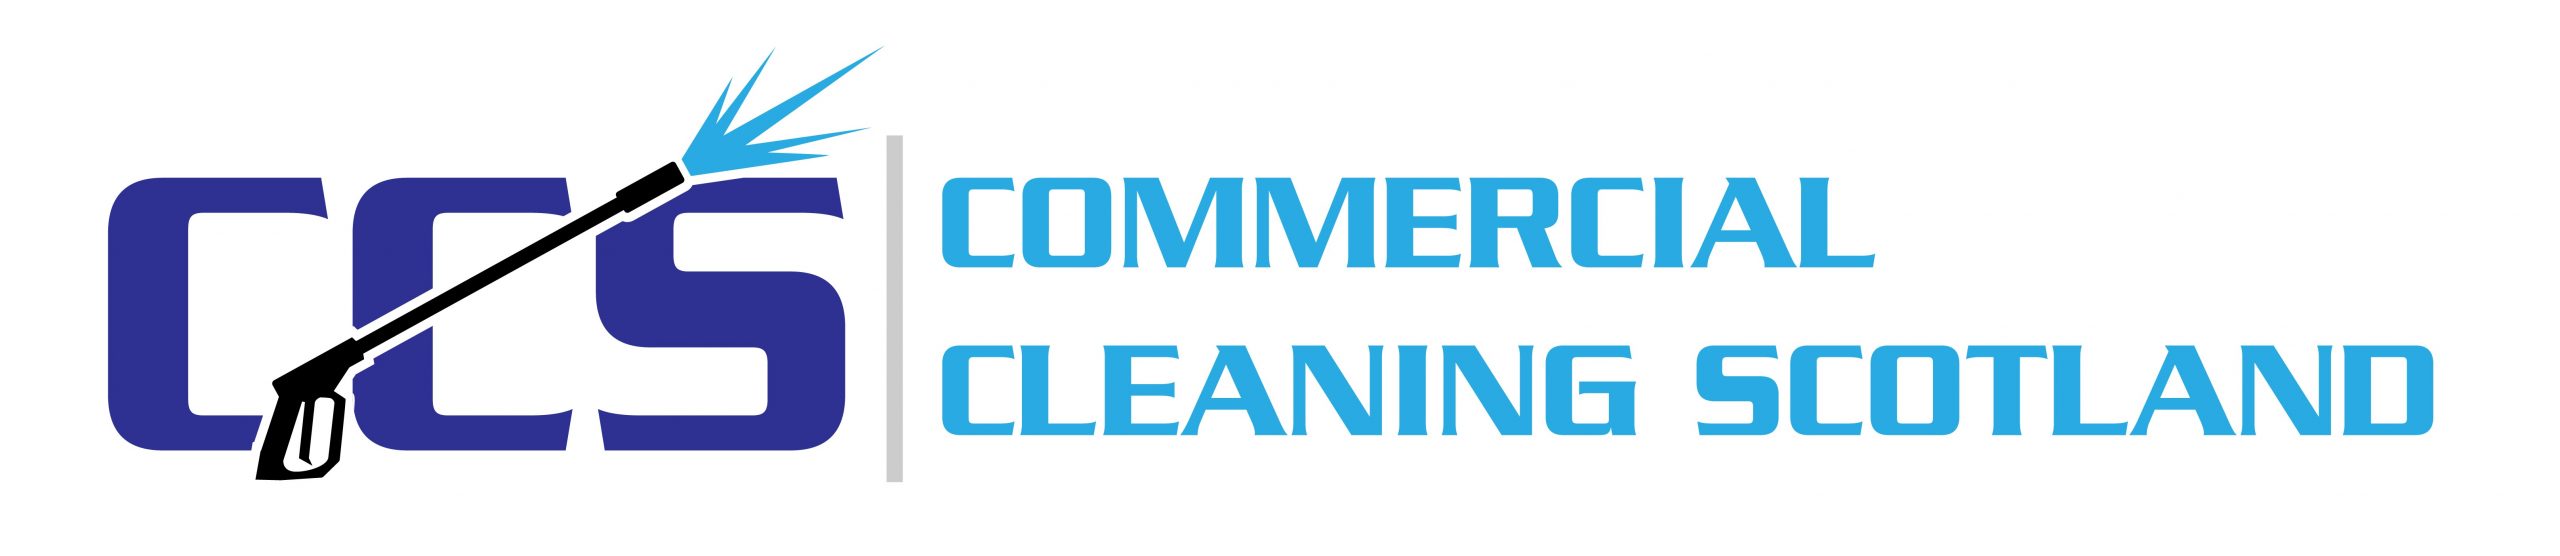 Commercial Cleaning Scotland